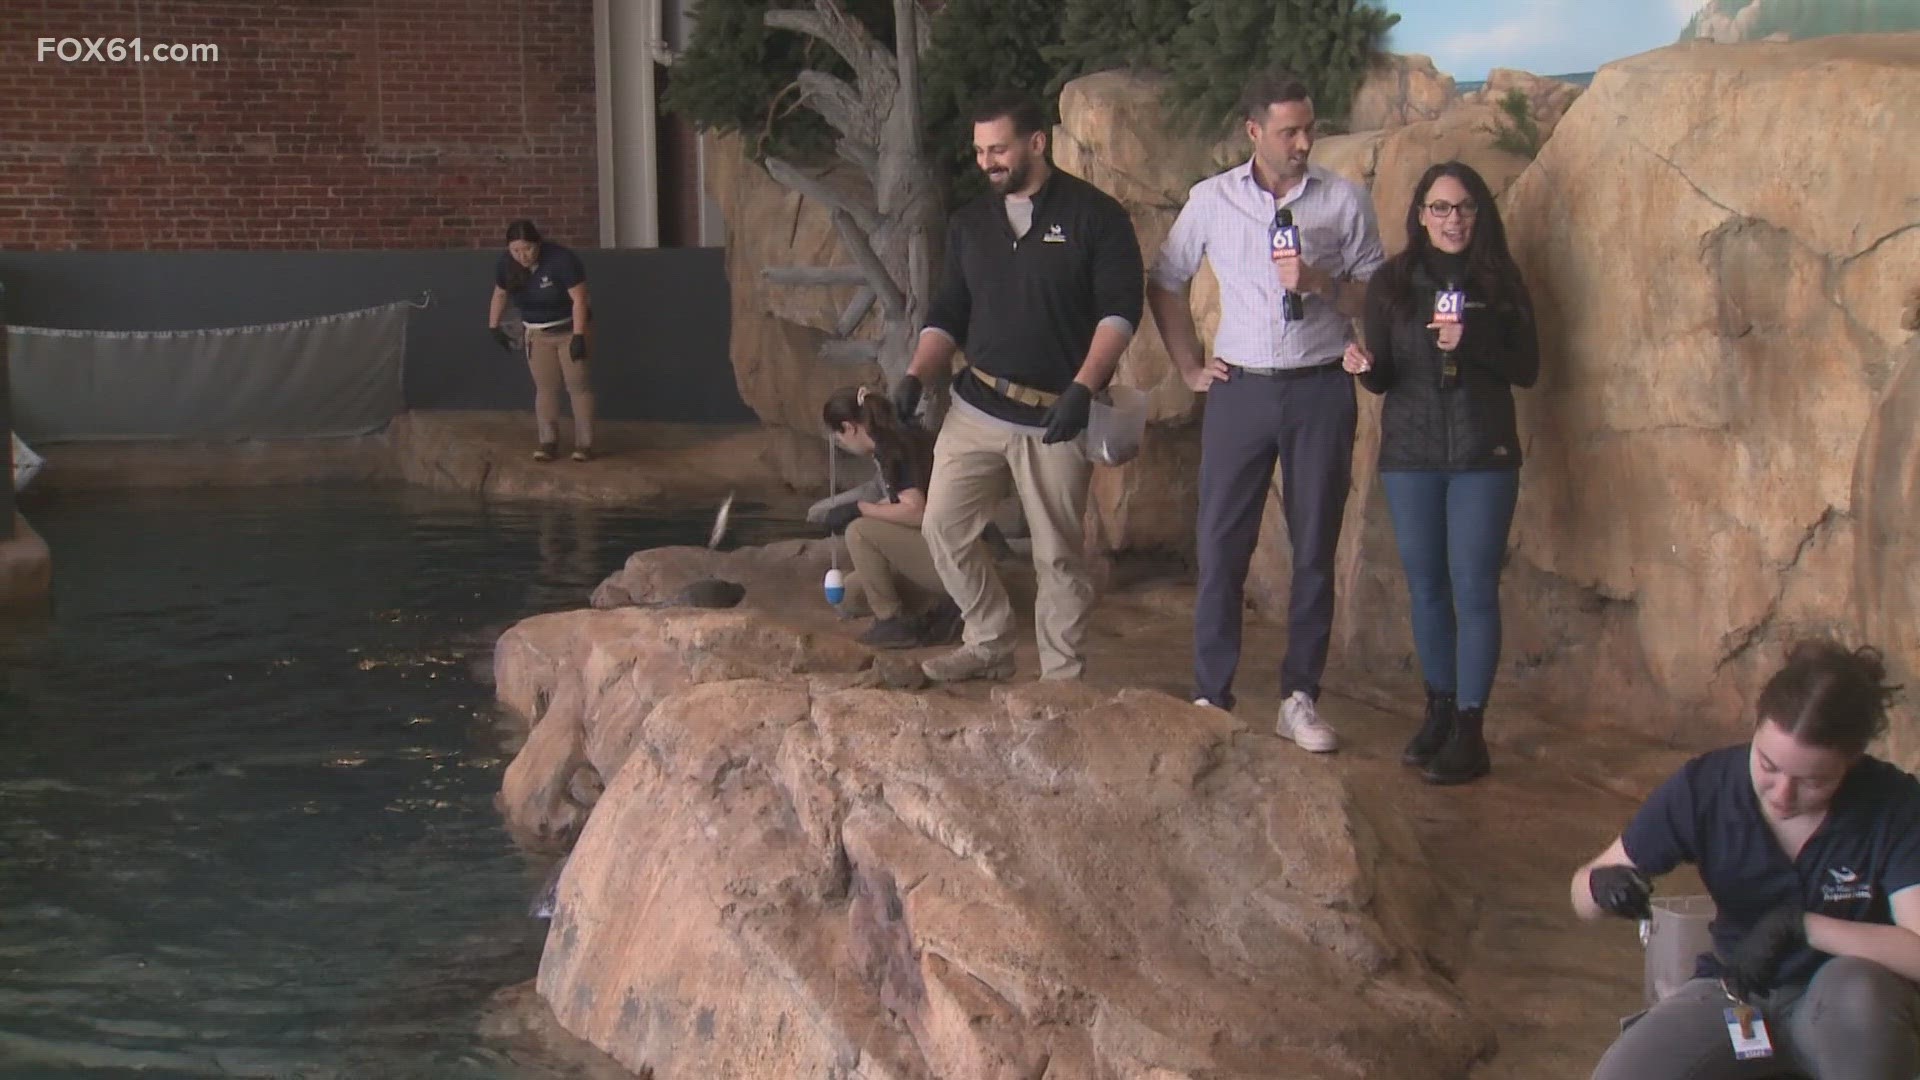 FOX61's Keith McGilvery and Rachel Piscitelli visit the Maritime Aquarium in Norwalk, with 75 live exhibits featuring more than 7,500 animals.